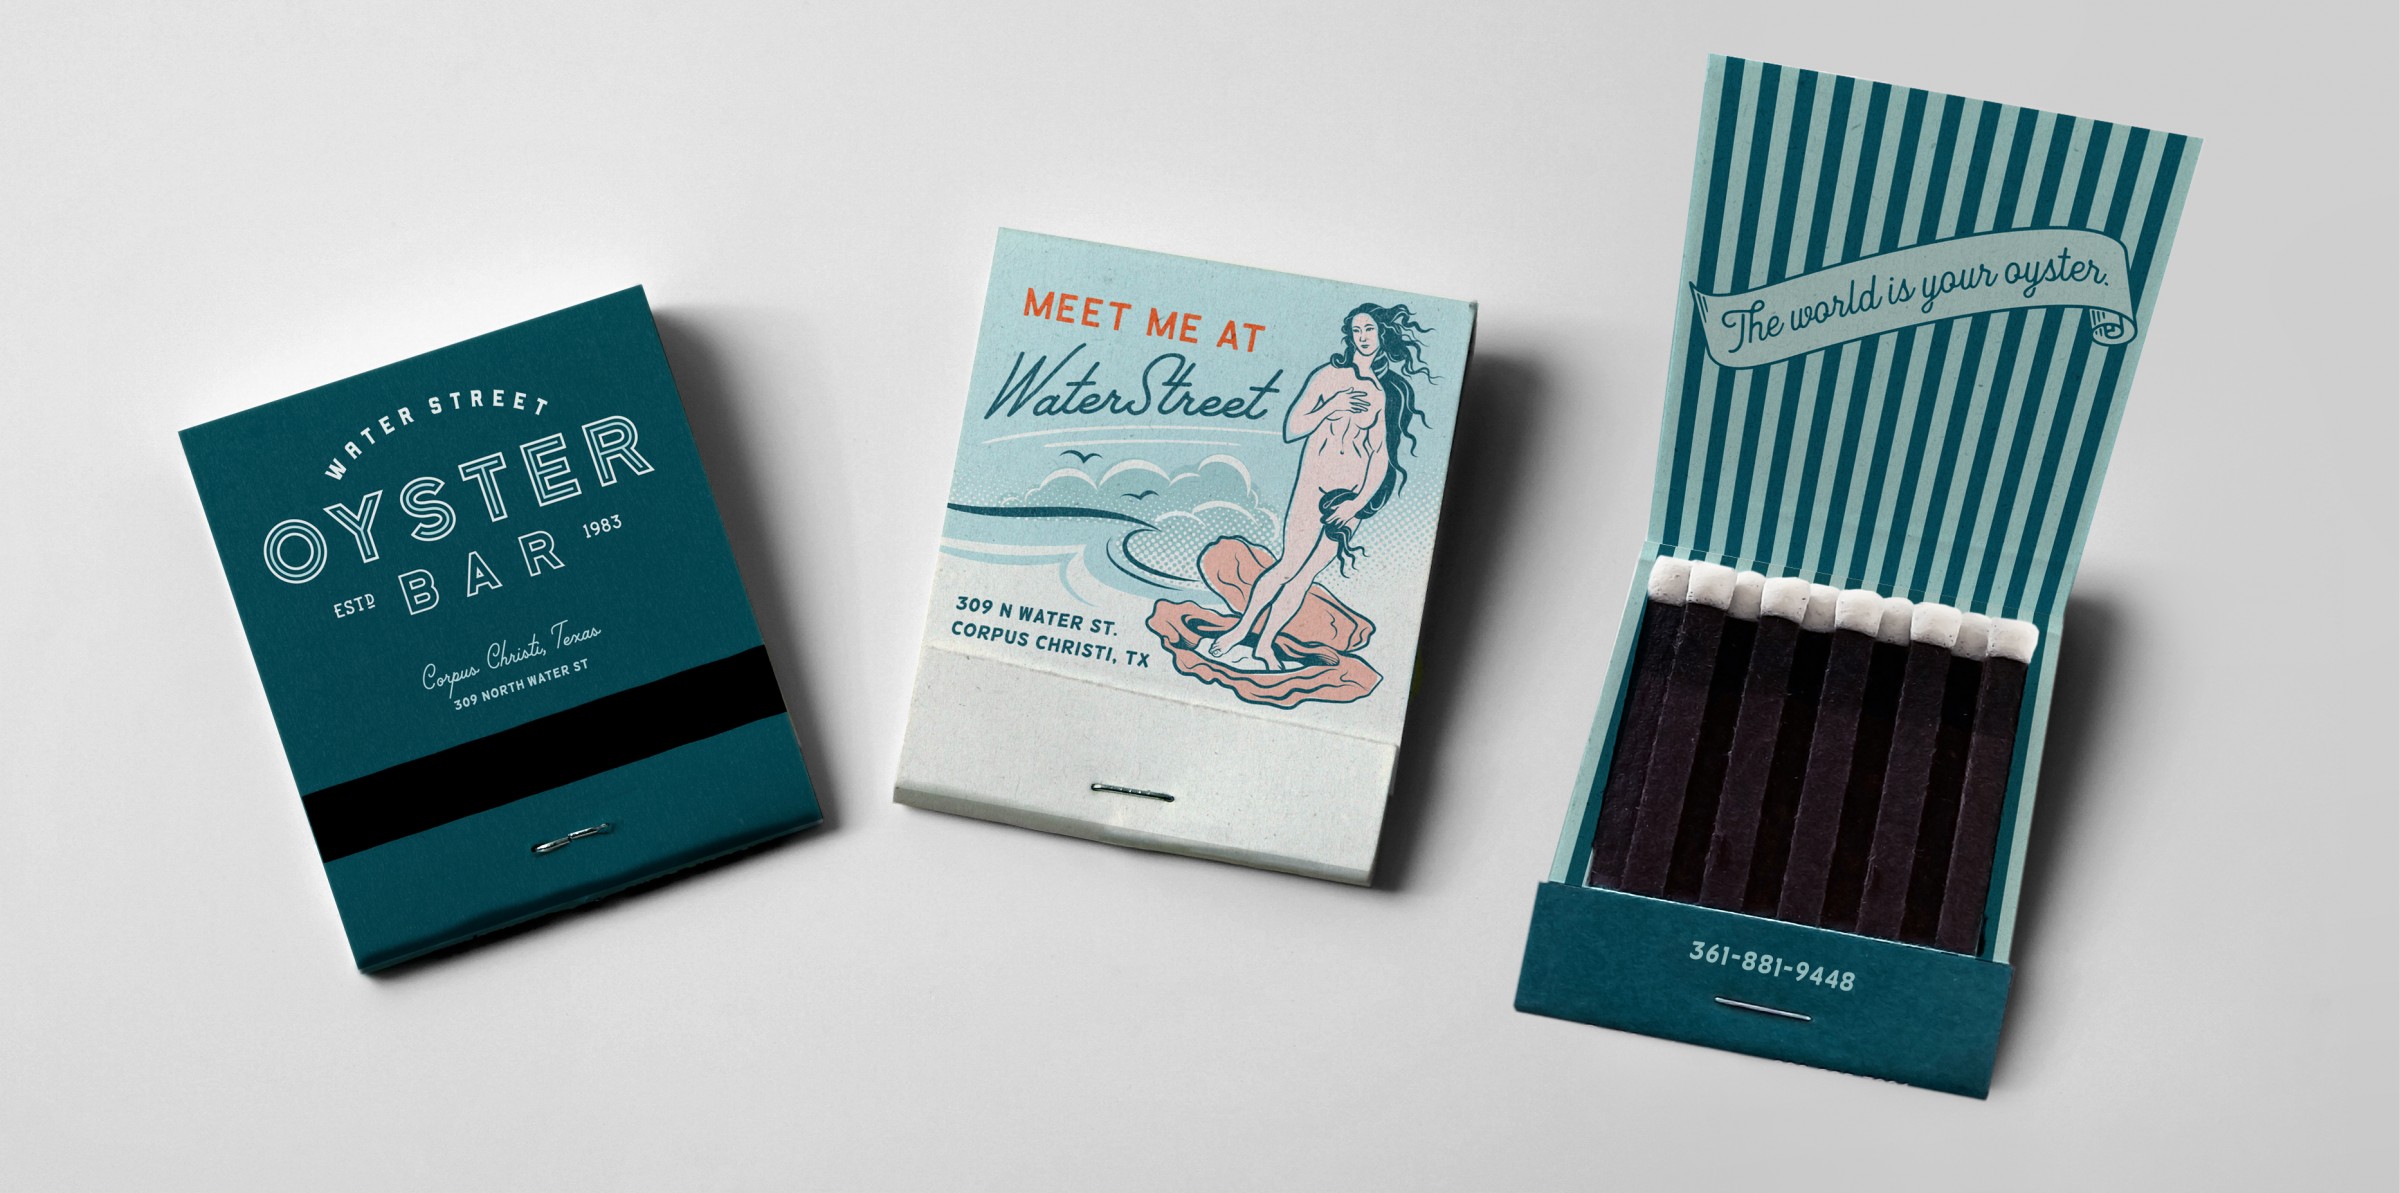 Showing the Oyster Bar matchbook as designed by MDR.